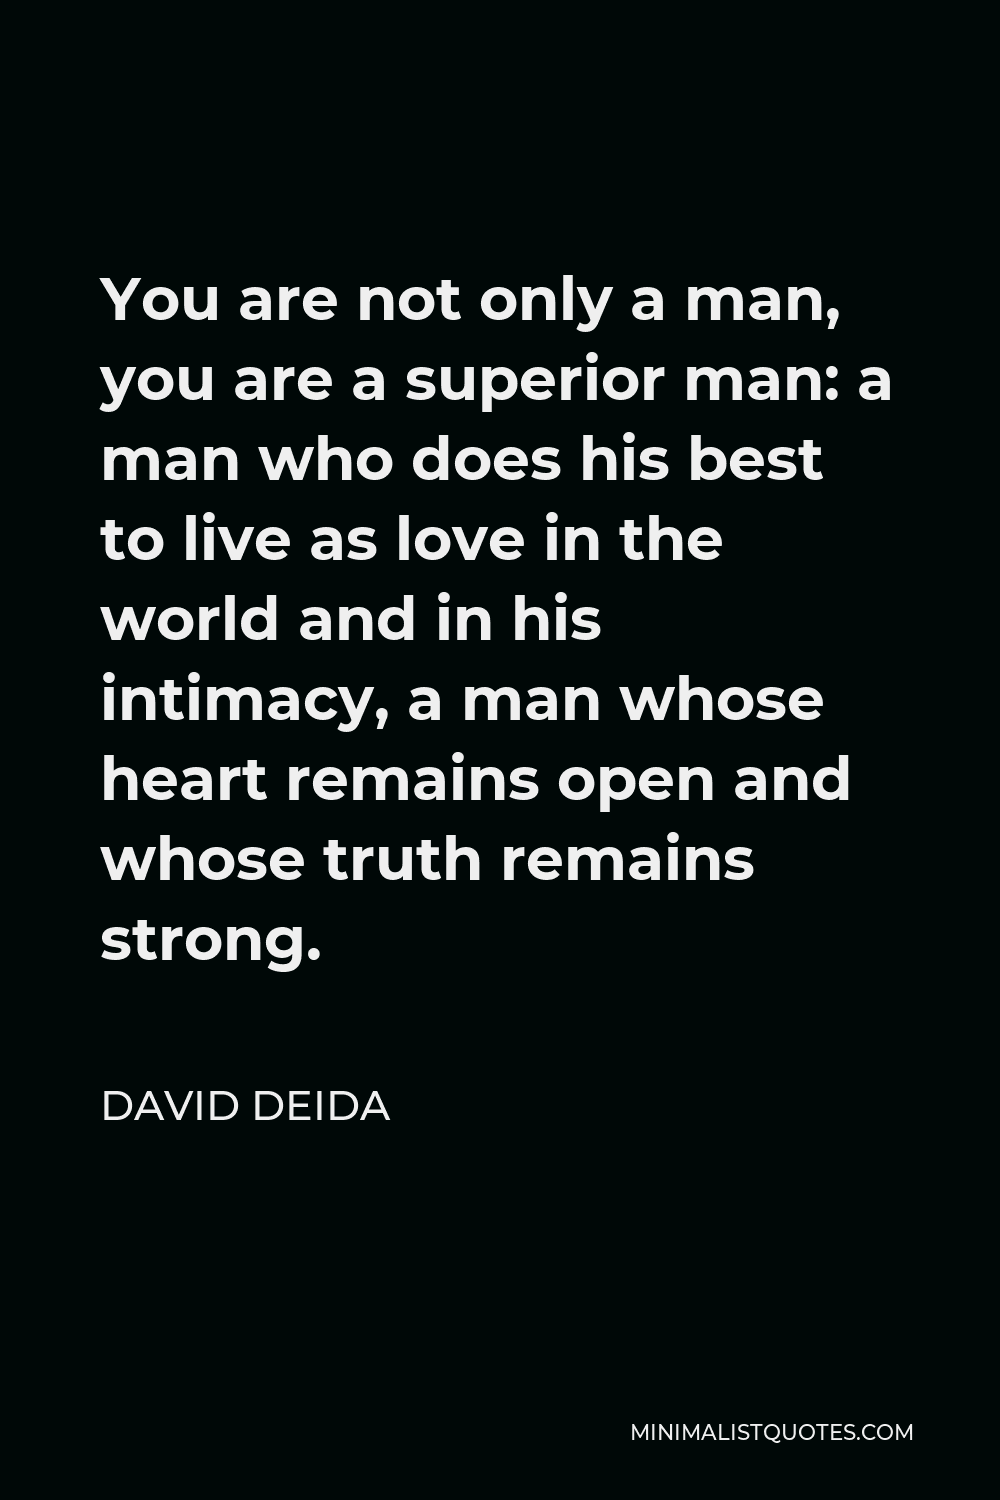 David Deida Quote - You are not only a man, you are a superior man: a man who does his best to live as love in the world and in his intimacy, a man whose heart remains open and whose truth remains strong.